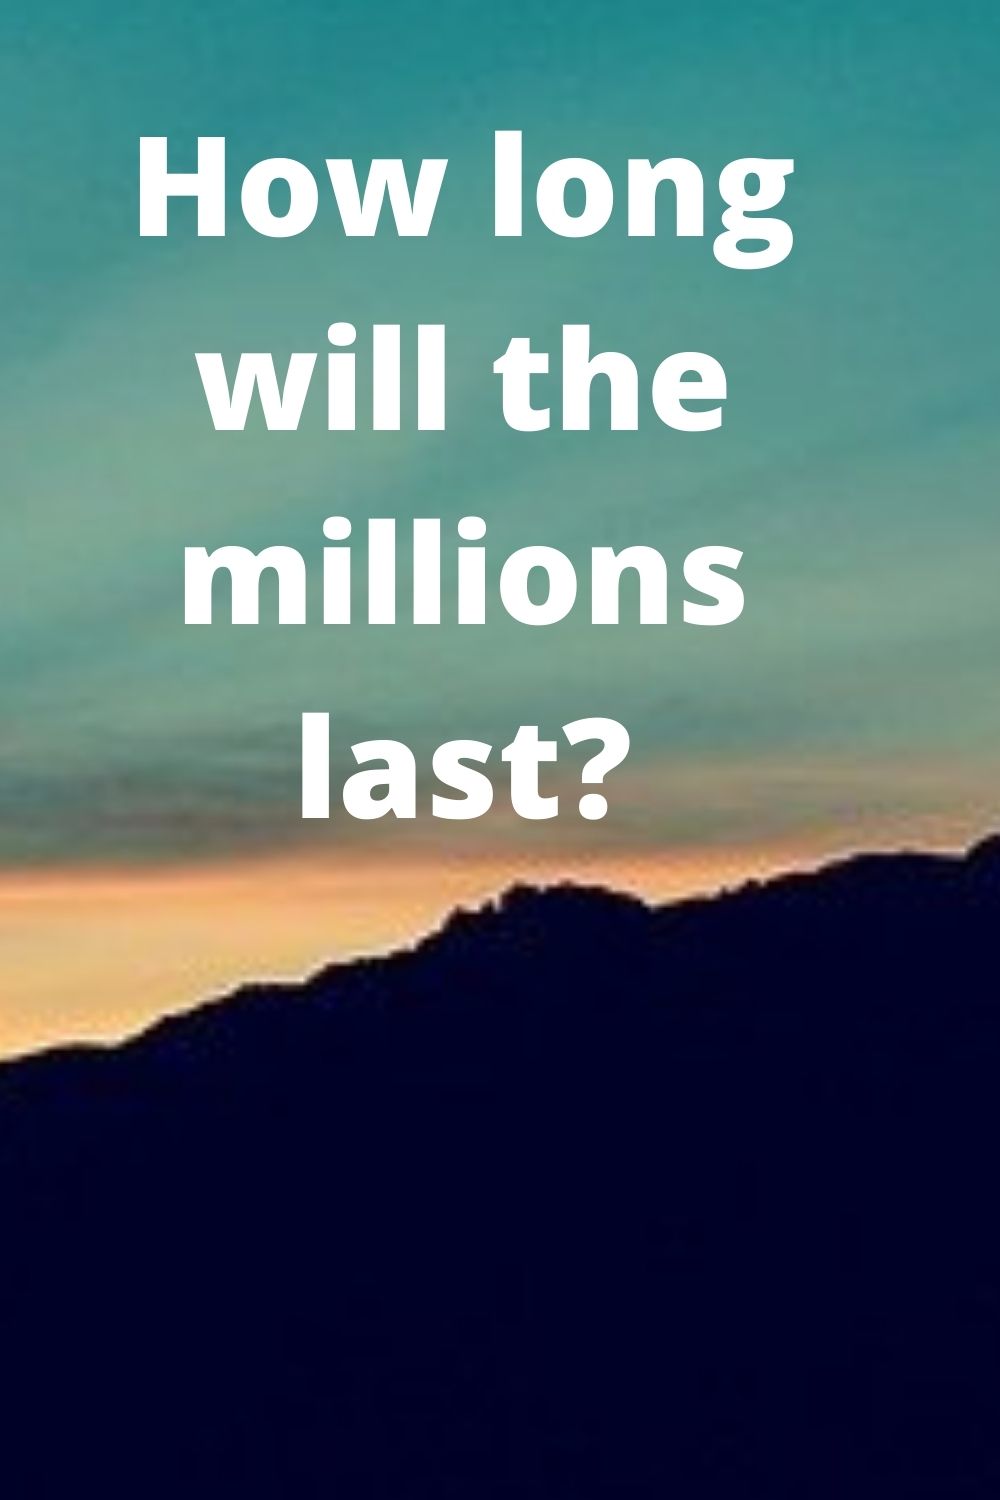 Millionaires: How long will the millions last?